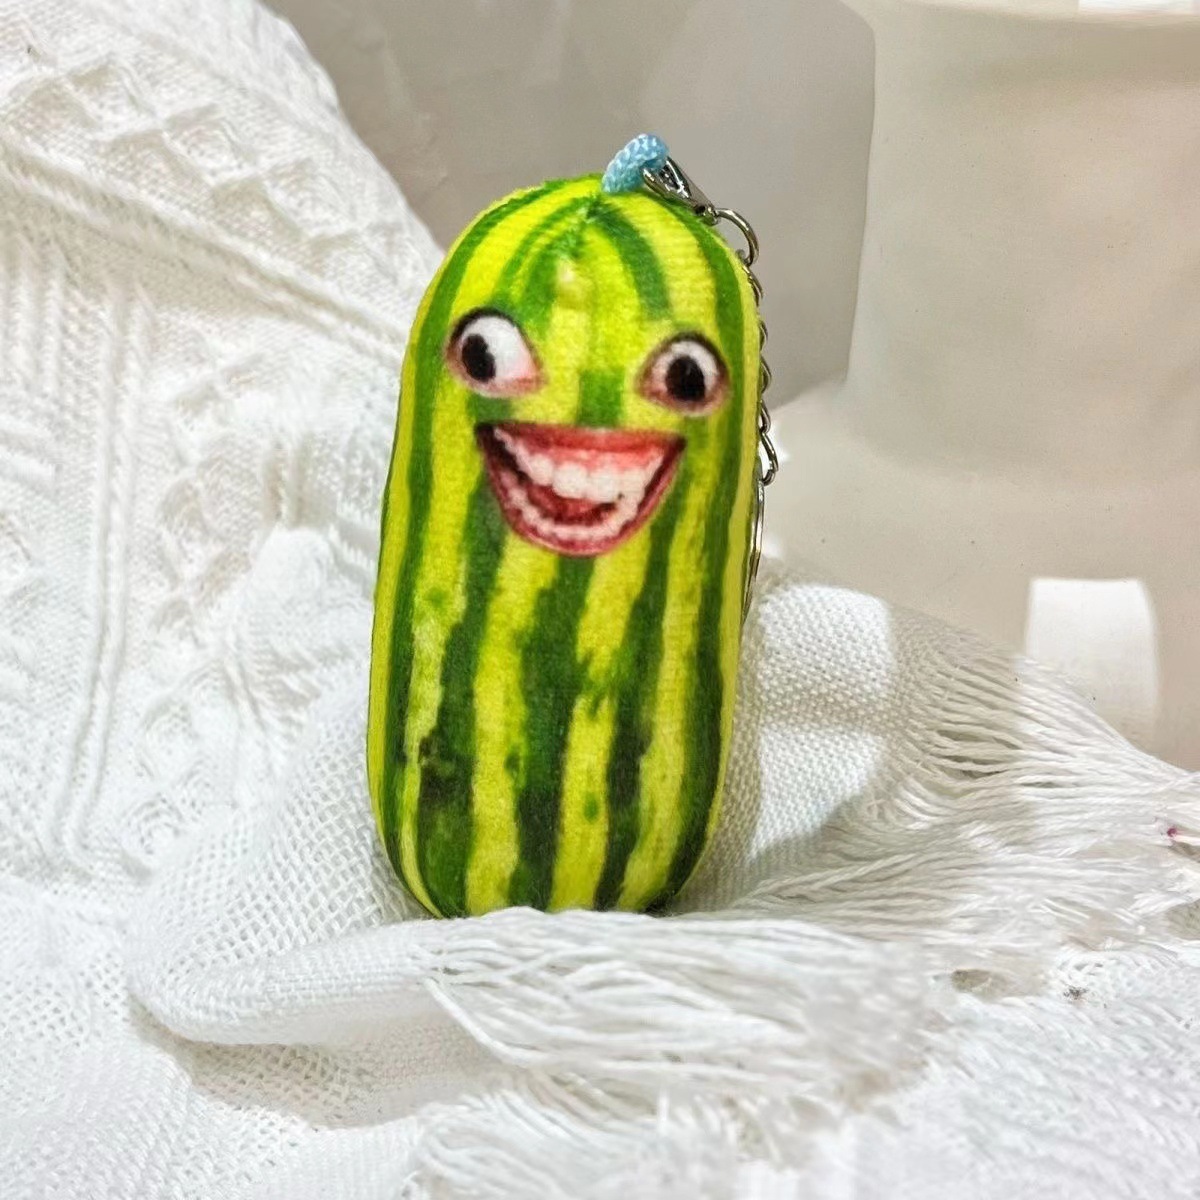 Watermelon Pedicel Voice Plush Toy Key Chain Douyin Same Watermelon Strip Funny Mouth for Western Family Who Understand